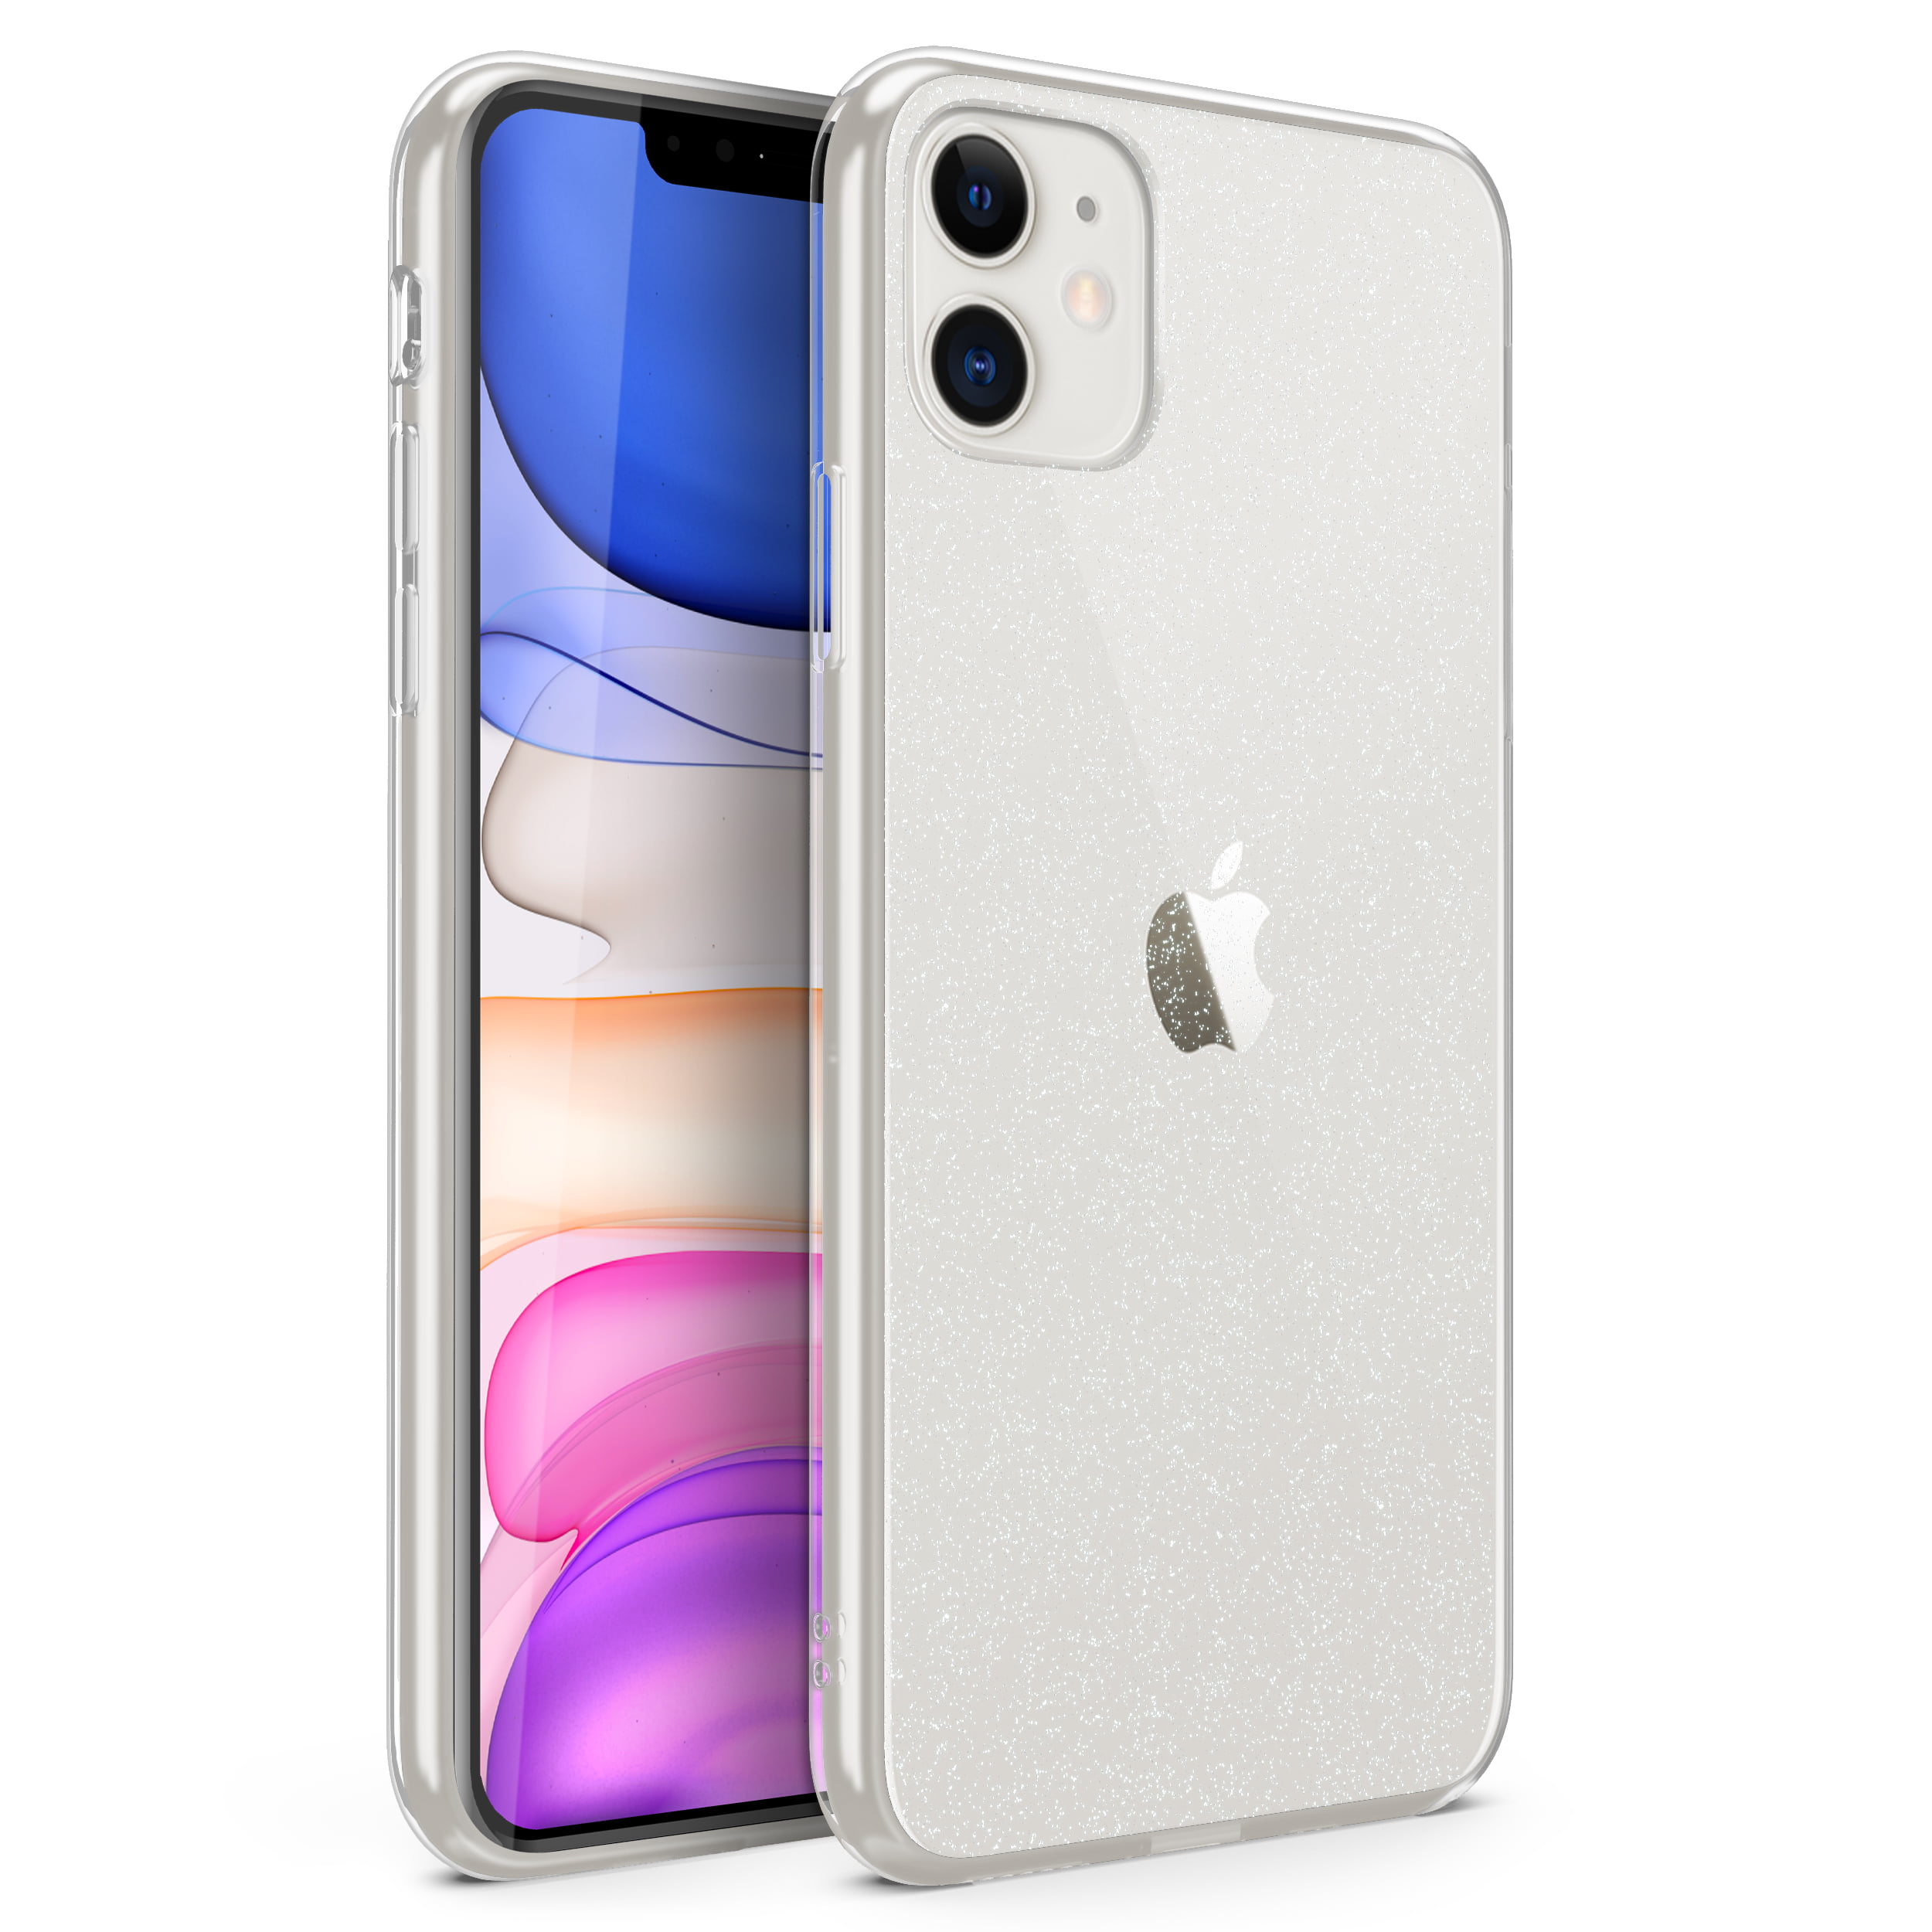 Silver 2019 New Horrizon Ultra Thin Slim Apple iPhone 11 Case Cover Clear Silicon Shockproof Soft TPU Case